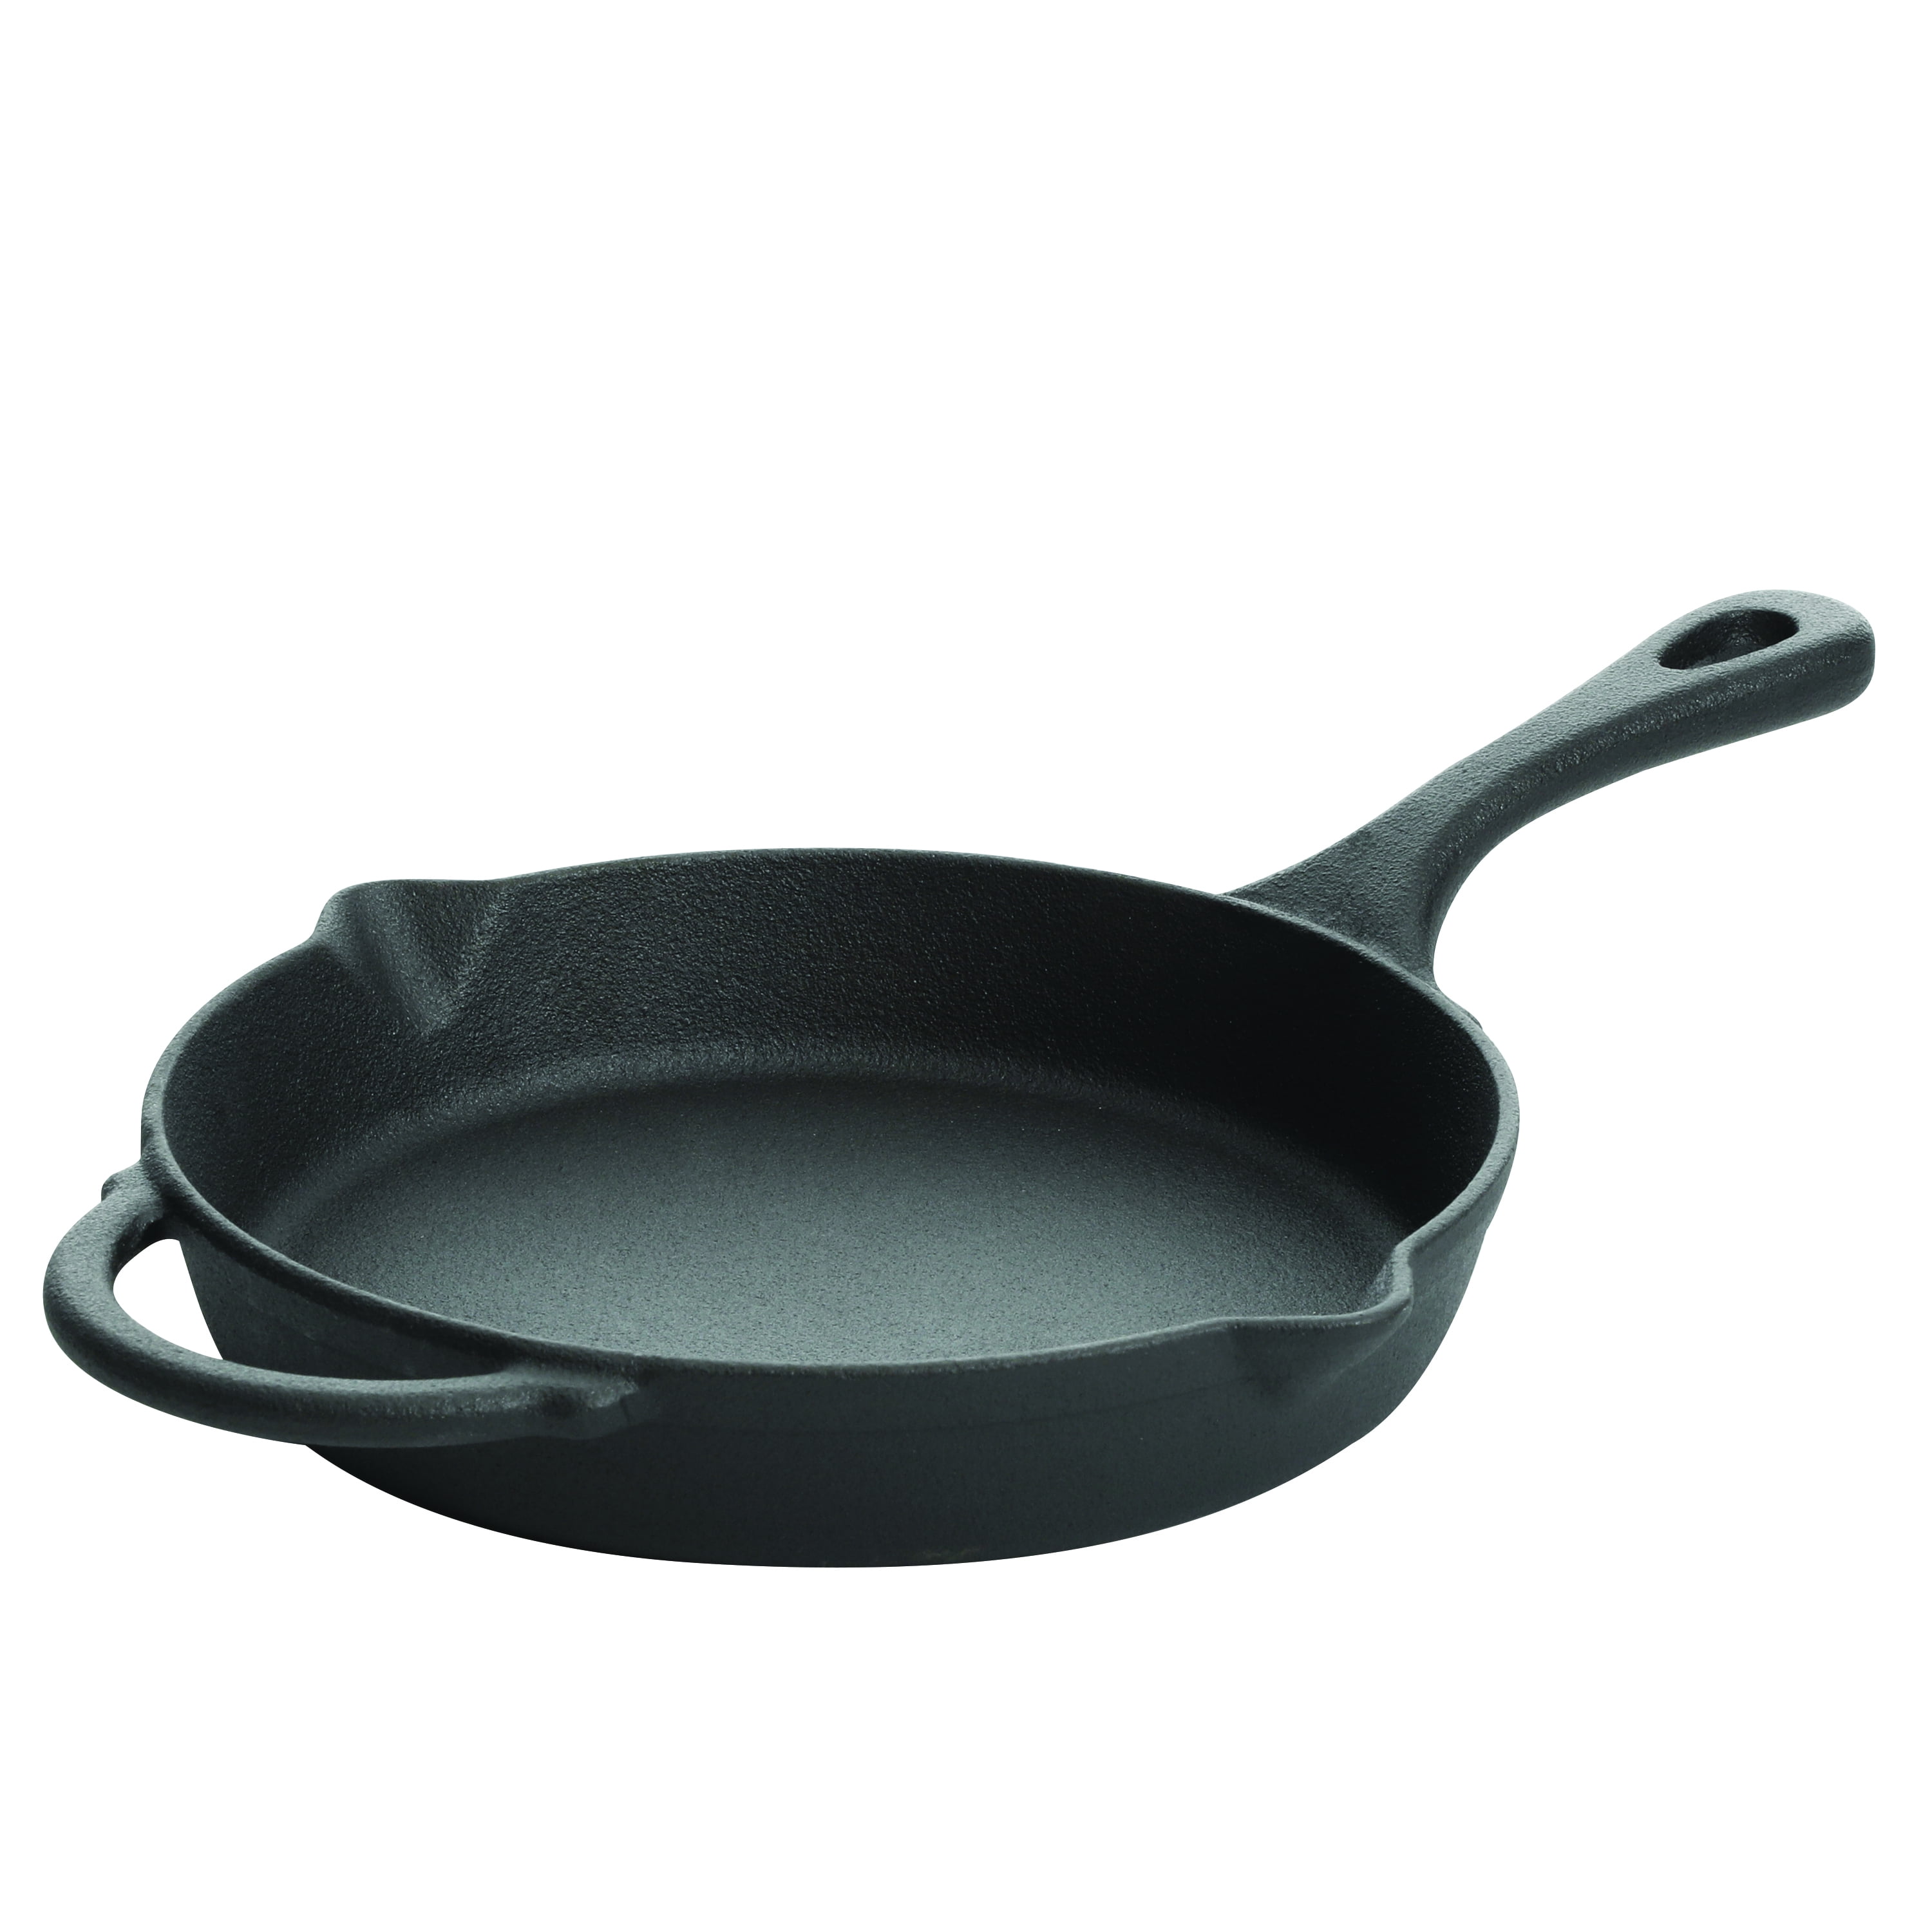 The Pioneer Woman Classic Belly 10 Piece Ceramic Non-stick and